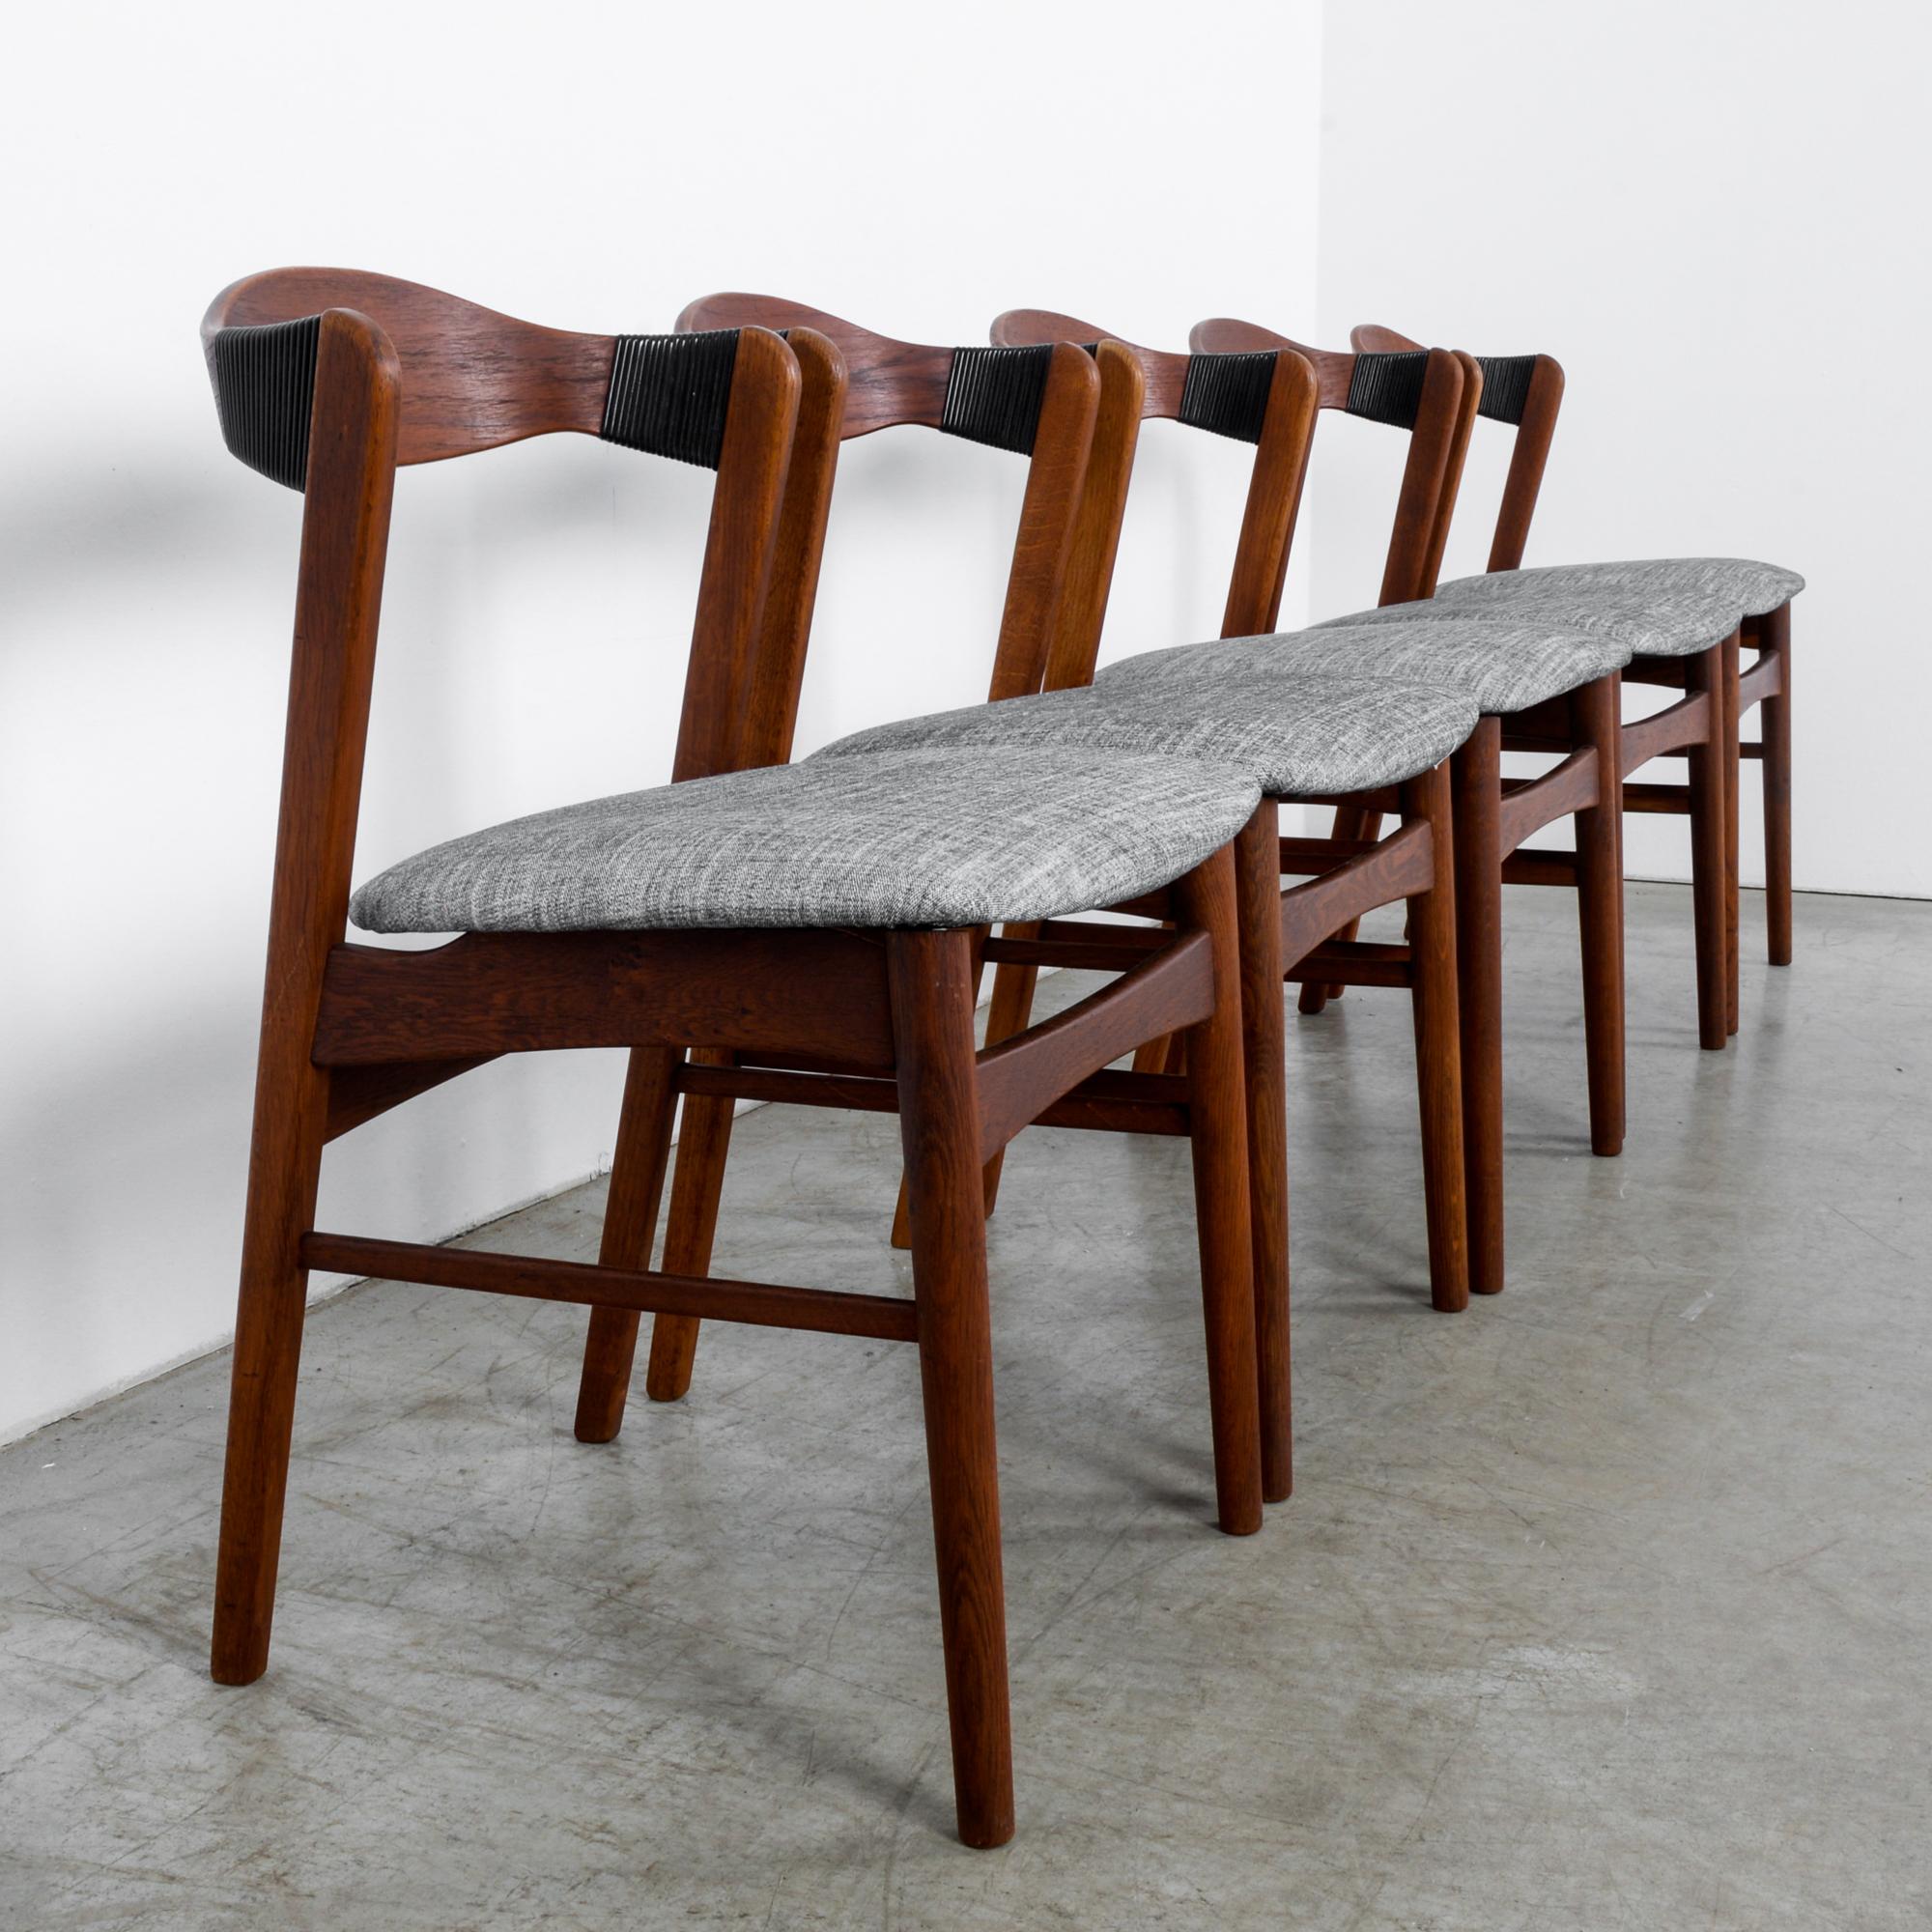 1960s Danish Teak Chairs with Upholstered Seats, Set of Five 7